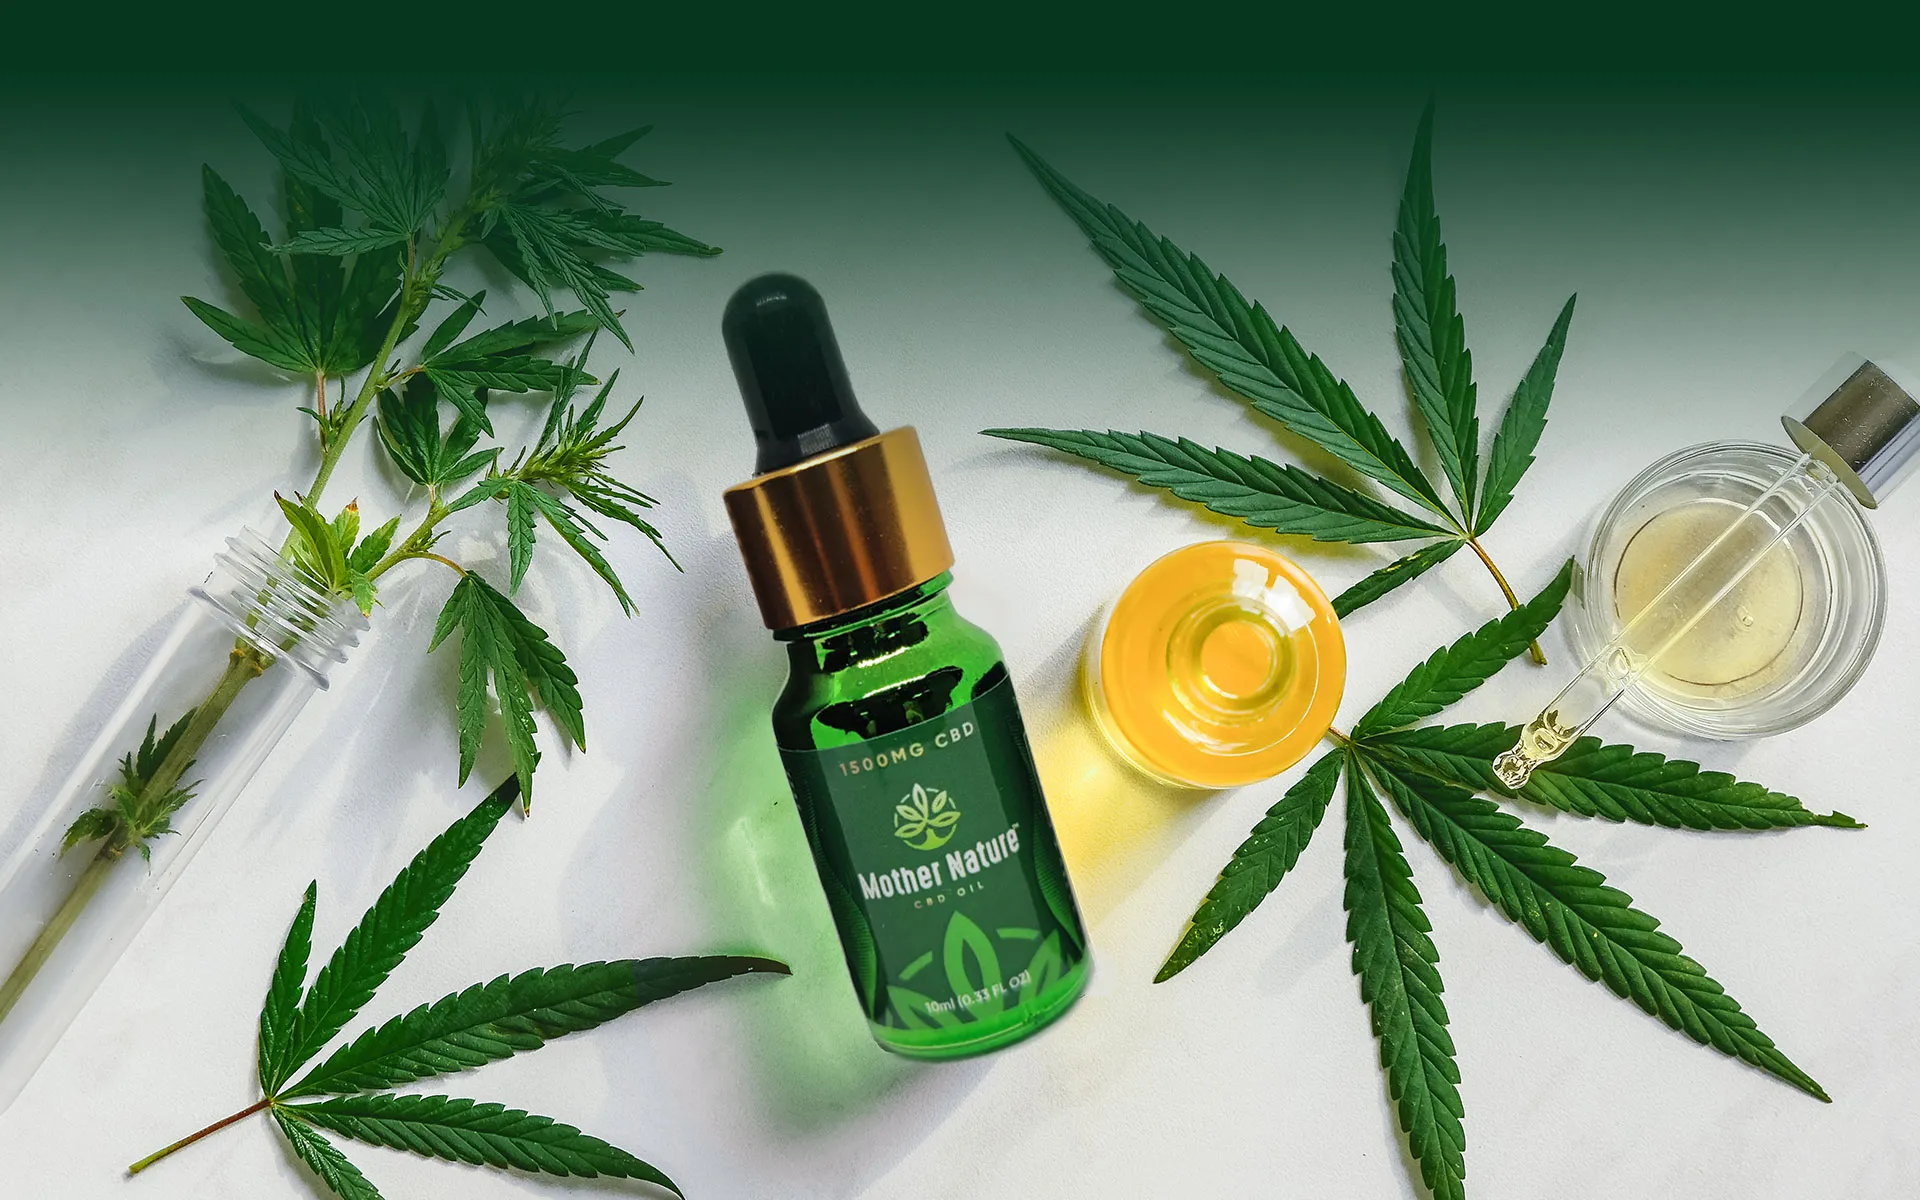 Cannabis and Hemp Specialist in United Kingdom, europe | Cannabis Products,Organic Food - Country Helper